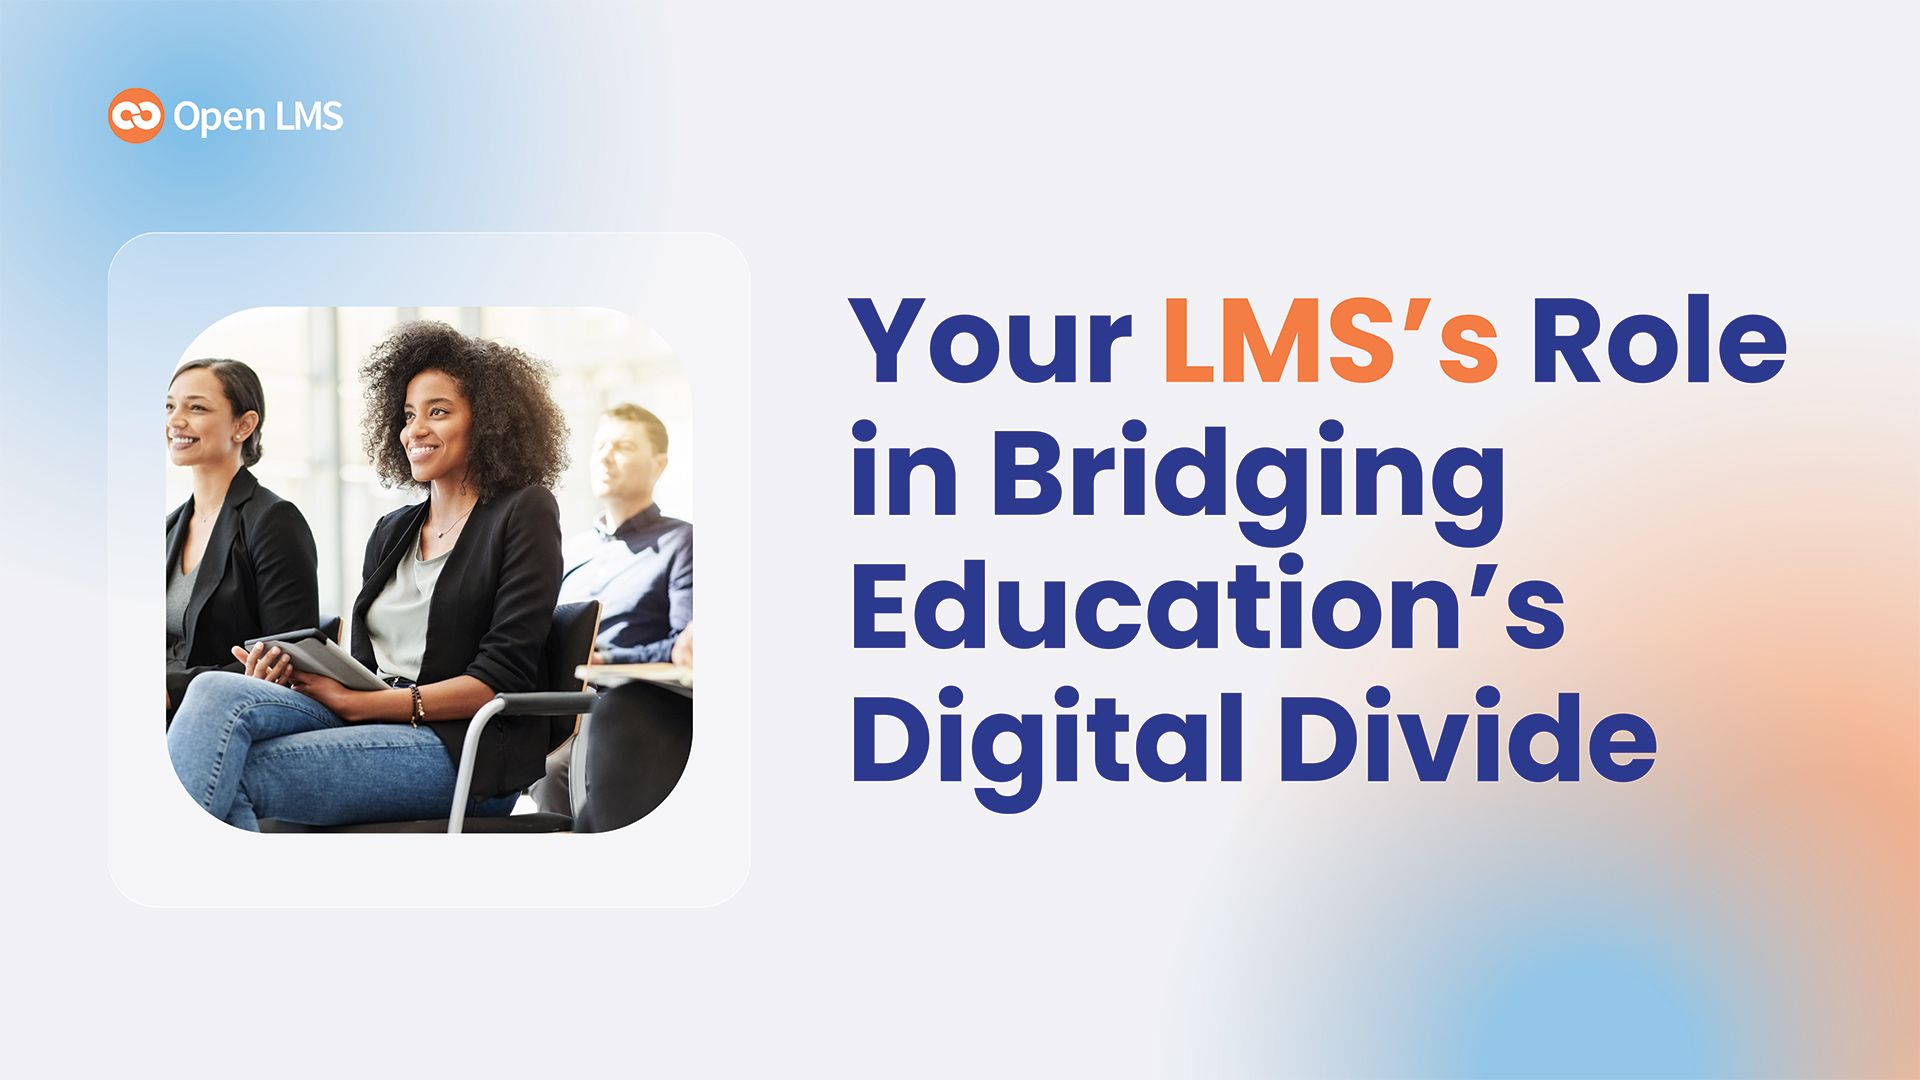 Your LMS’s Role in Bridging Education’s Digital Divide